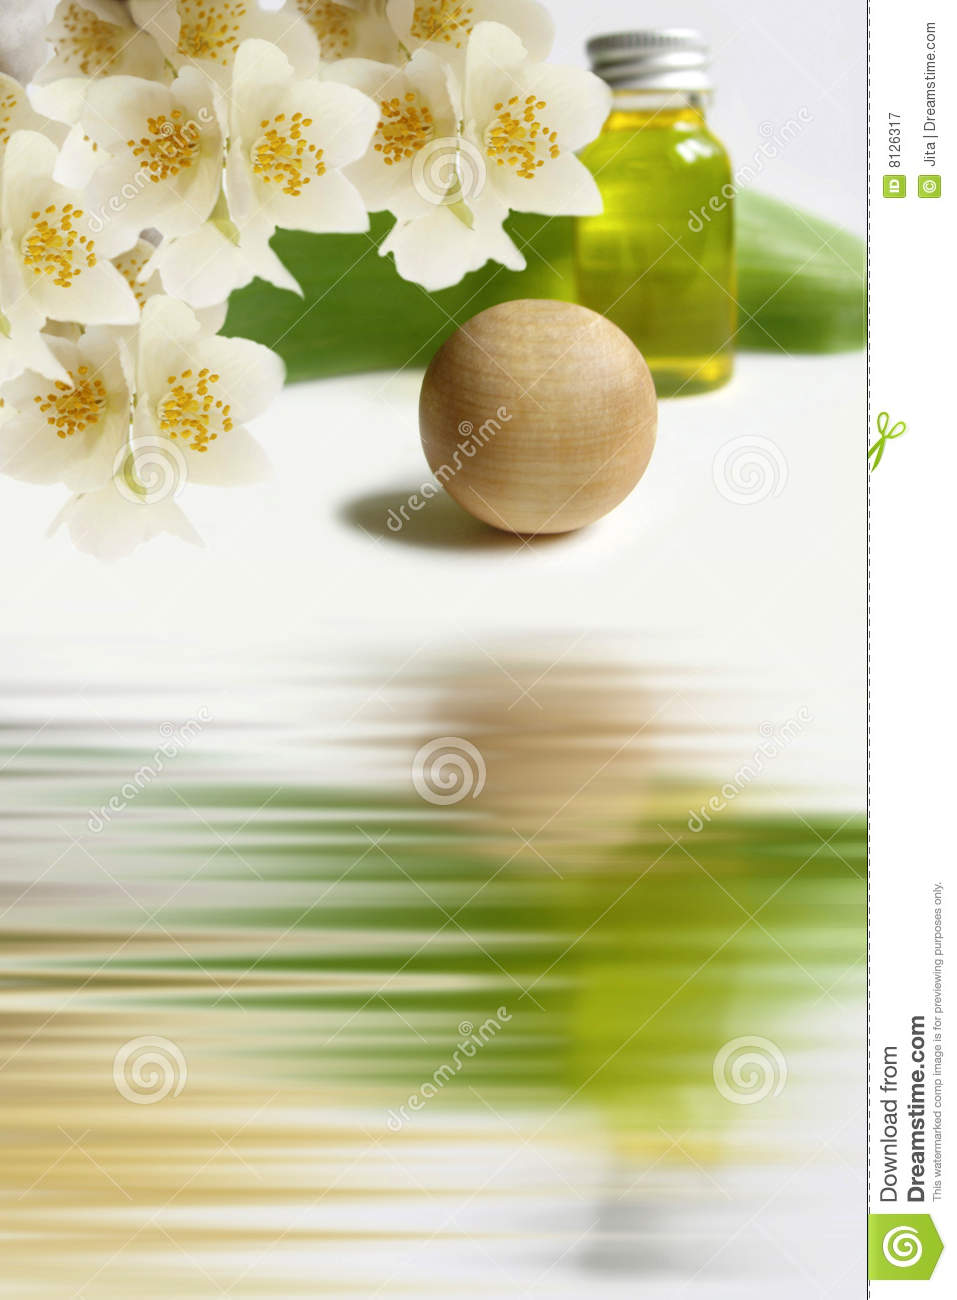 Essential Oil Royalty Free Stock Photography   Image  8126317